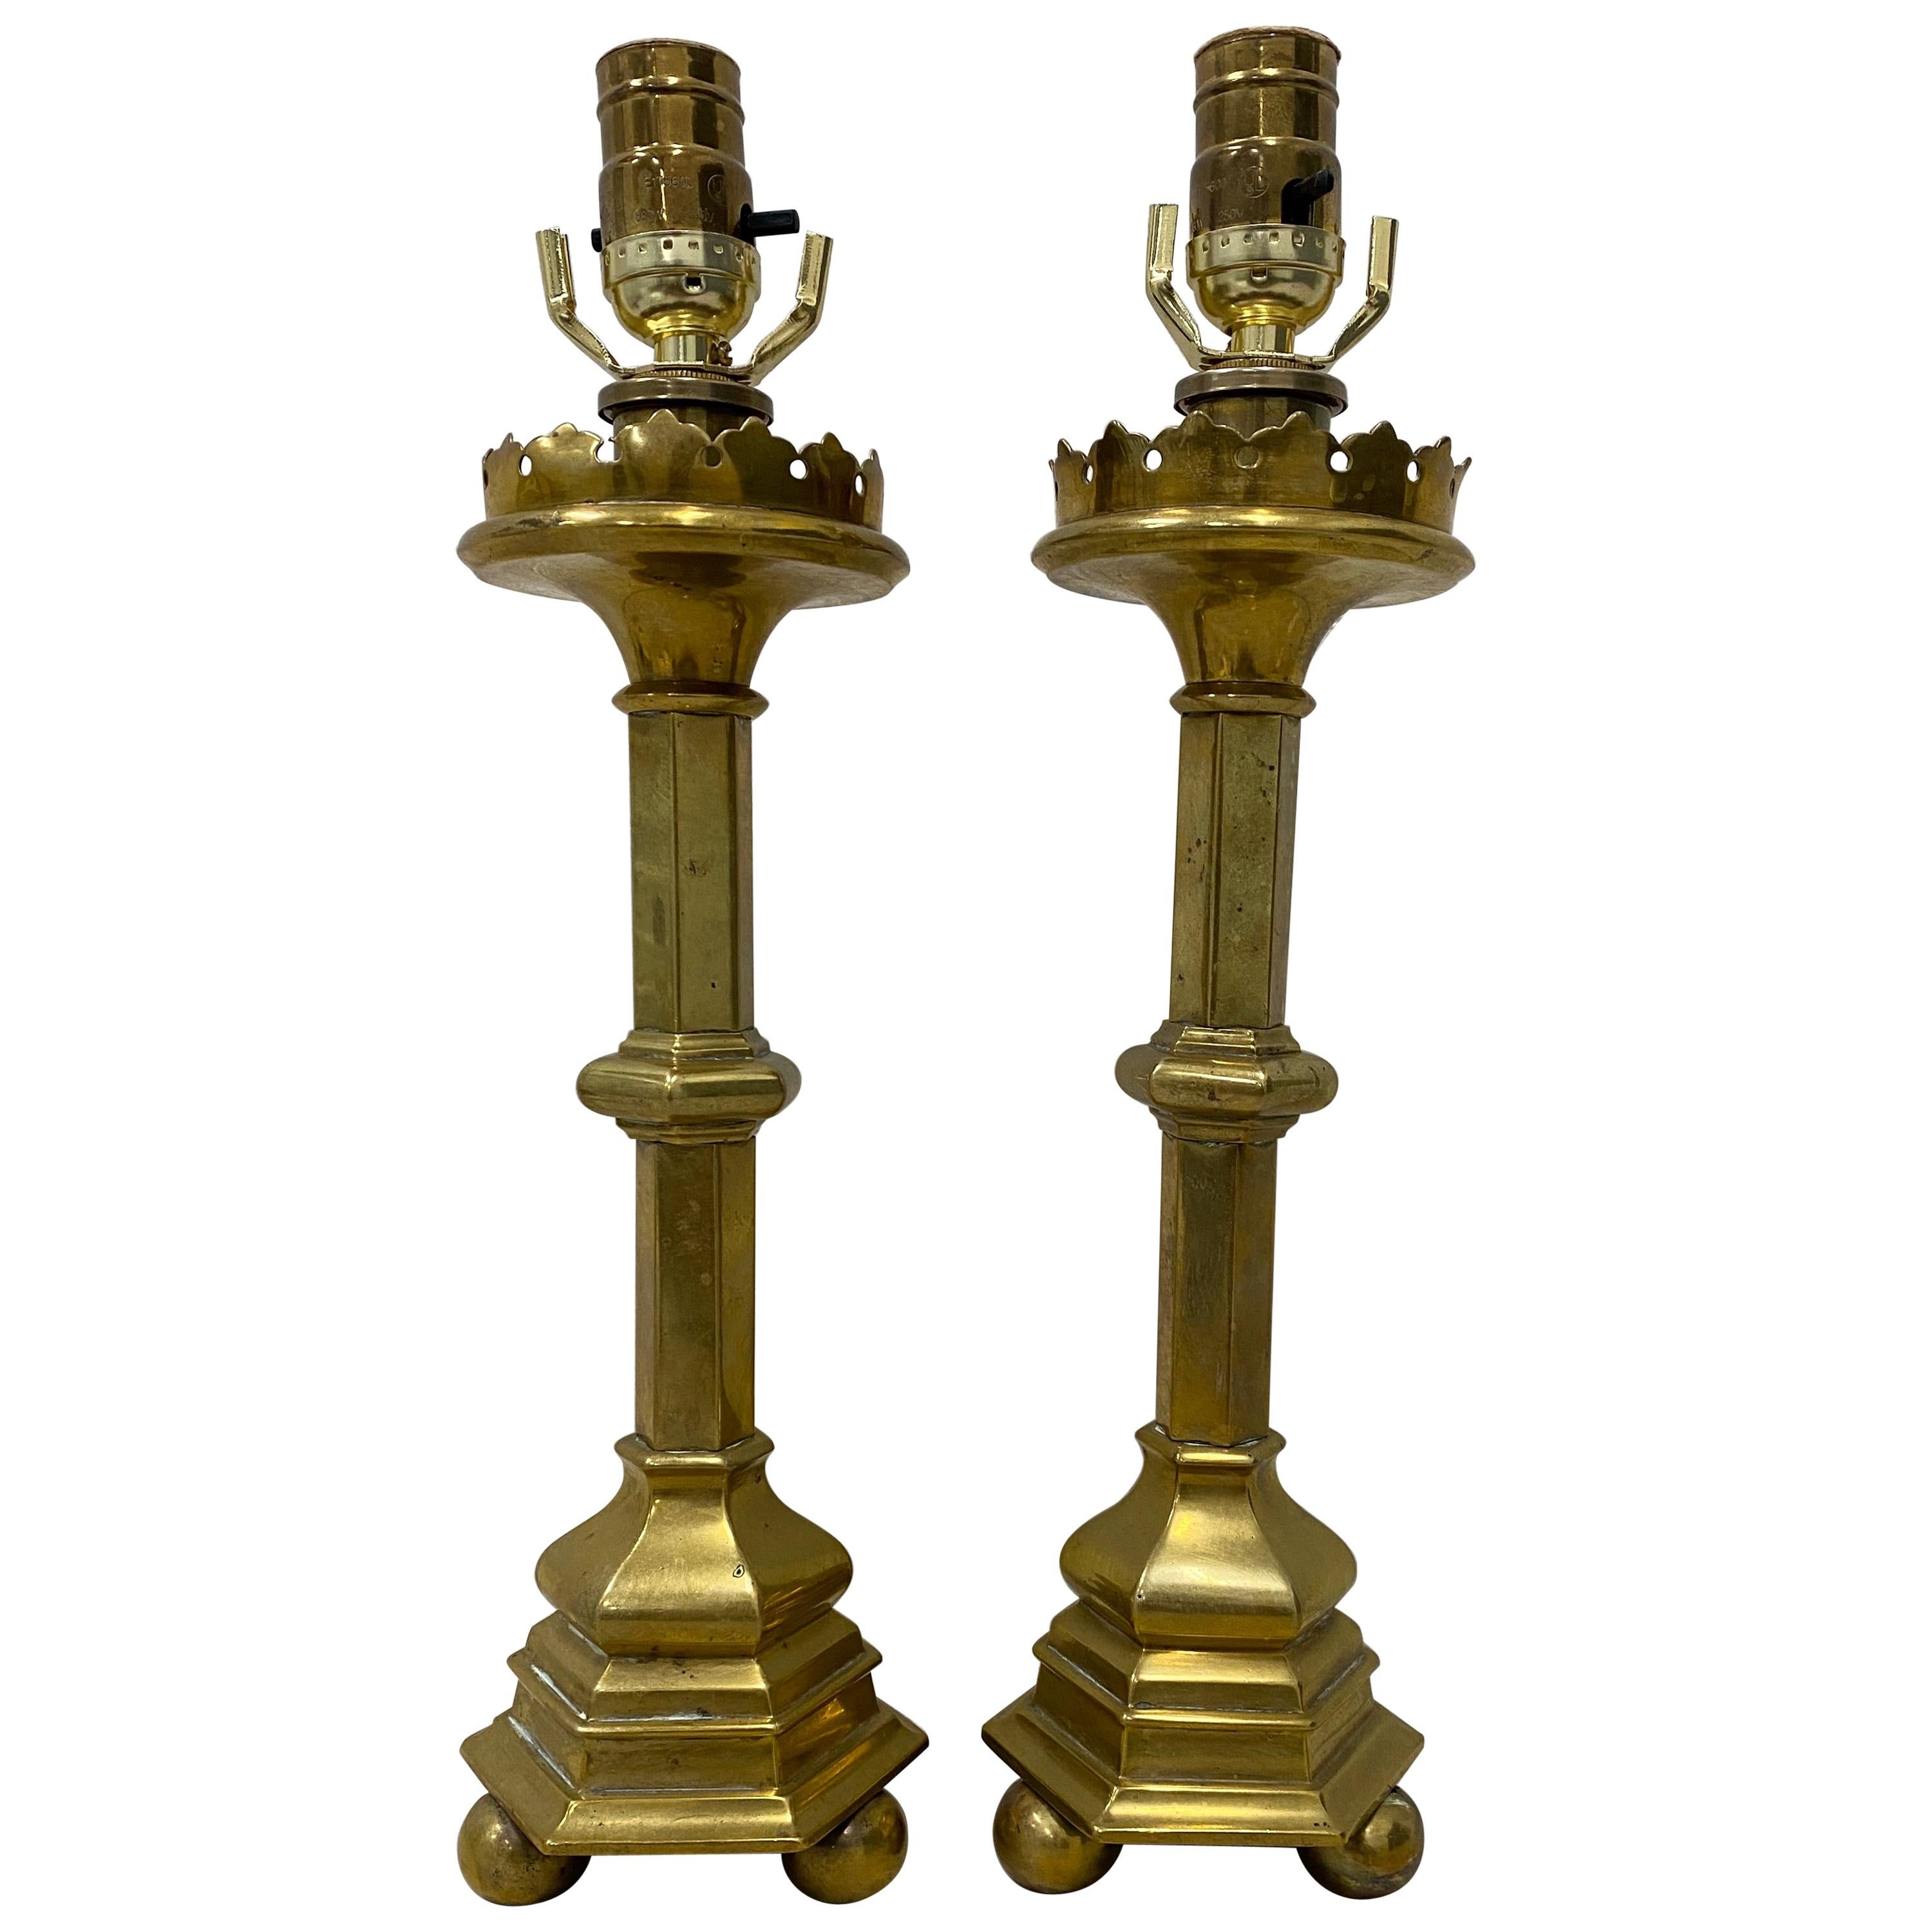 How do you use a brass oil lamp?